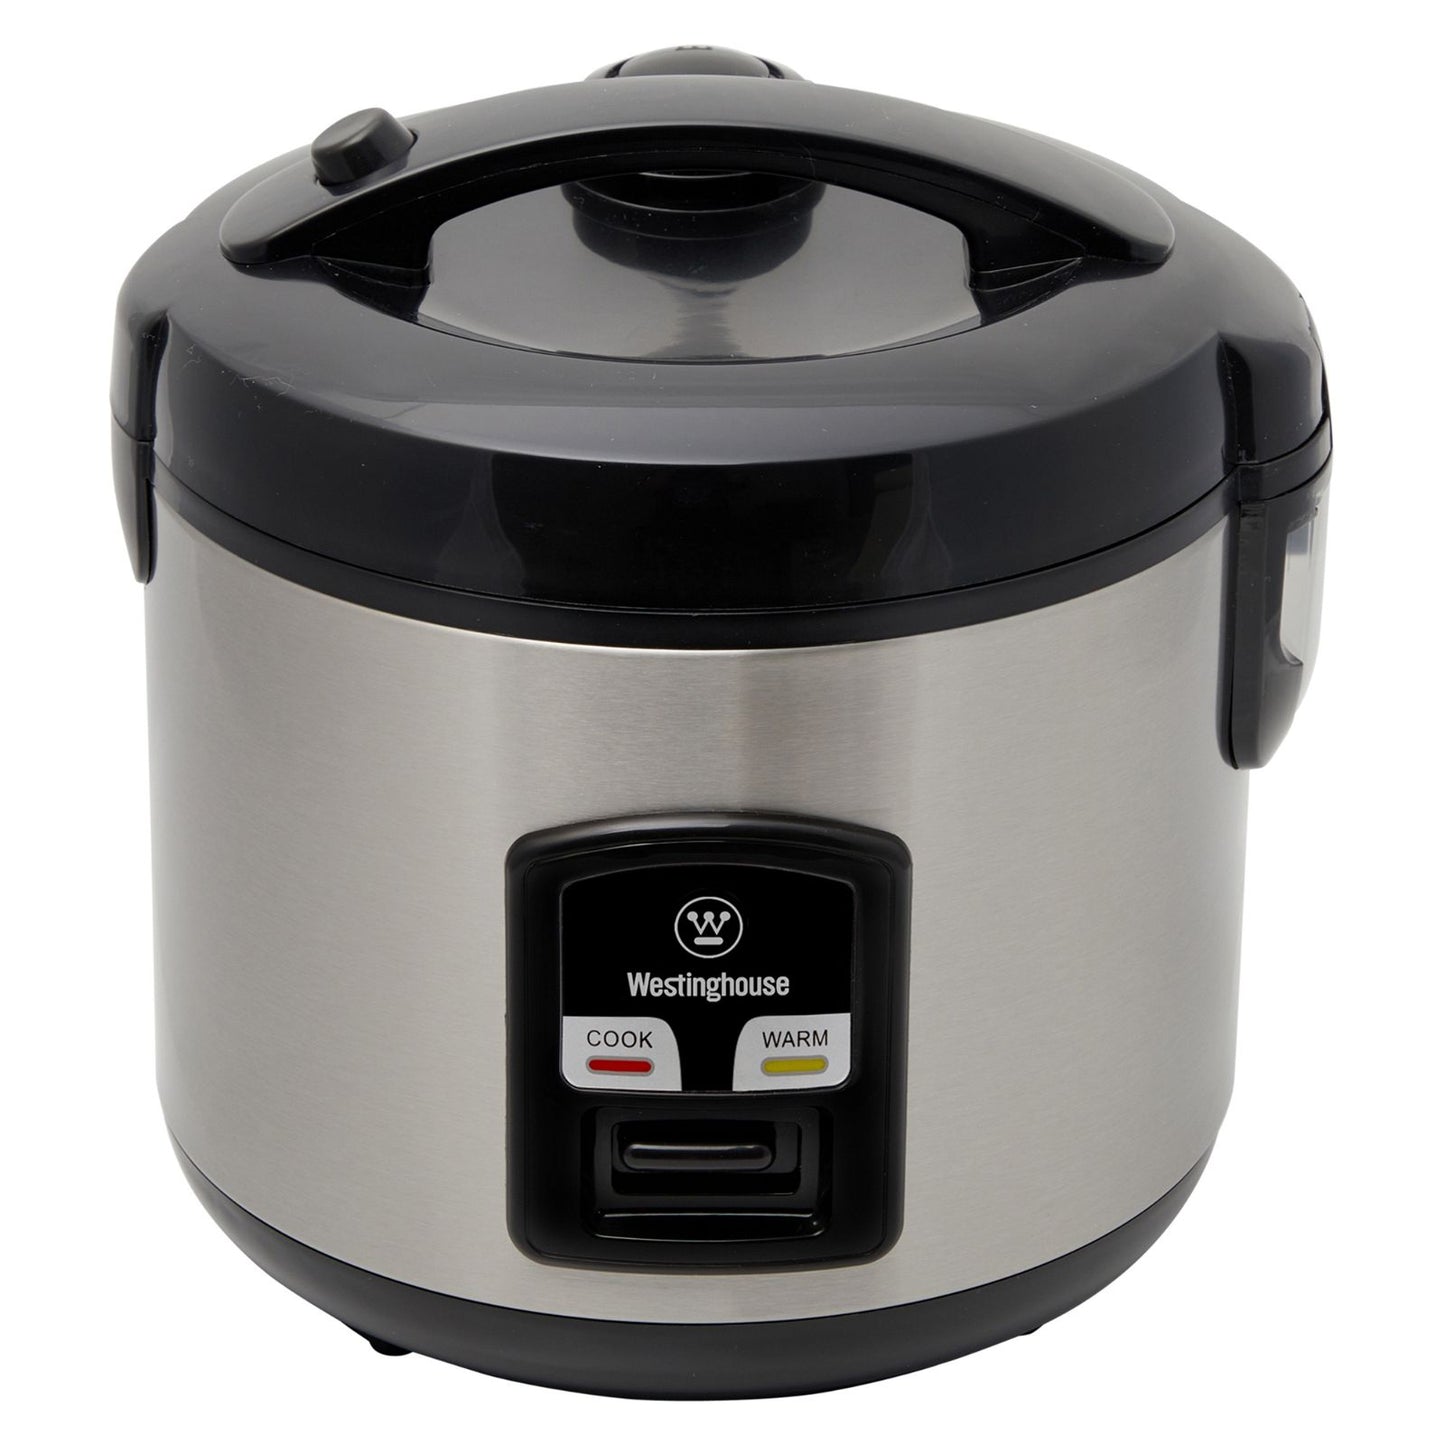 Westinghouse 6 Cup Rice Cooker Keep Warm Function-#product_category#- Distributed by:  under license